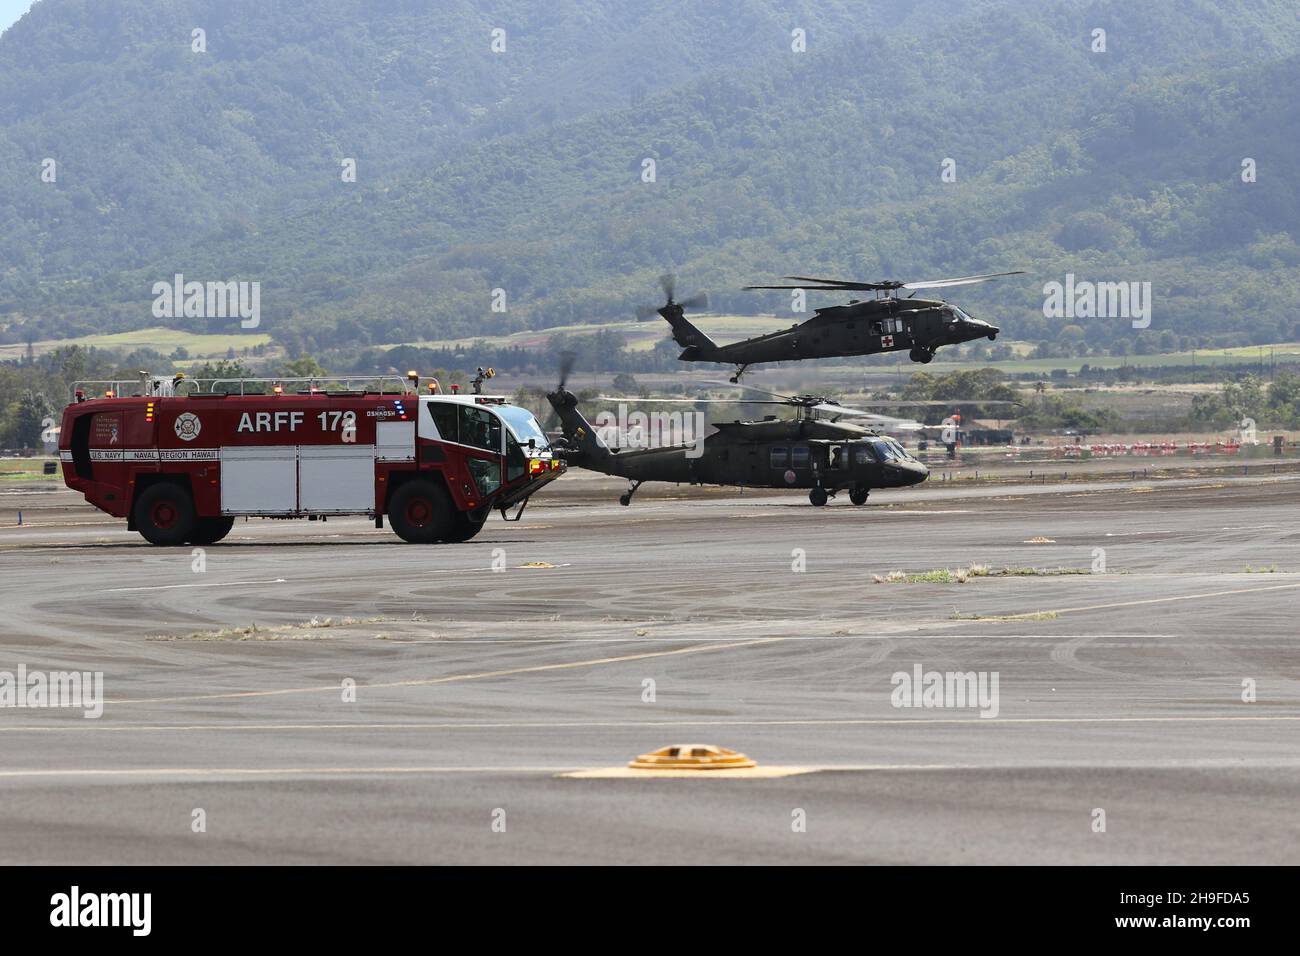 Hawaii Army National Guard (HIARNG) UH-60M Black Hawk helicopters land near a fire truck before the water salute for Sgt. Kaylen H. Hayashi, a UH-60M Black Hawk Helicopter Mechanic, with Charlie Company, 1st Battalion, 183rd Aviation Regiment, Wahiawa, Hawaii, Aug. 7, 2021. A water salute involves plumes of water shot from fire trucks over an aircraft in celebration of Hayashi’s final drill before retirement from the National Guard. (U.S. Army National Guard photo by Spc. Mariah-Alexsandra Manandic-Kapu) Stock Photo